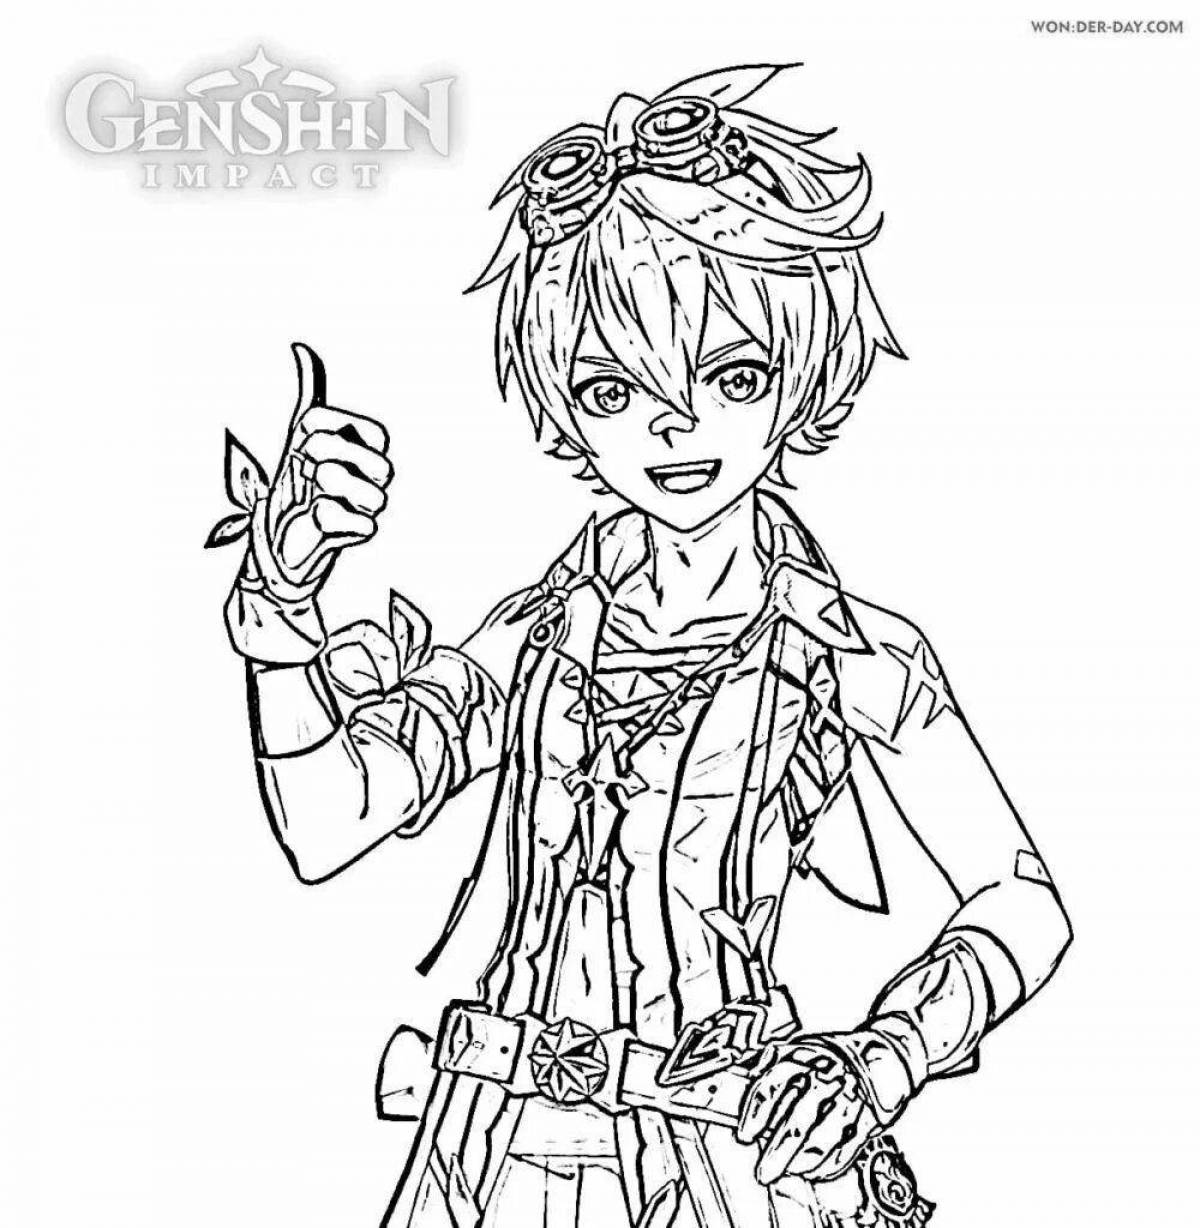 Updated genshin impact coloring page